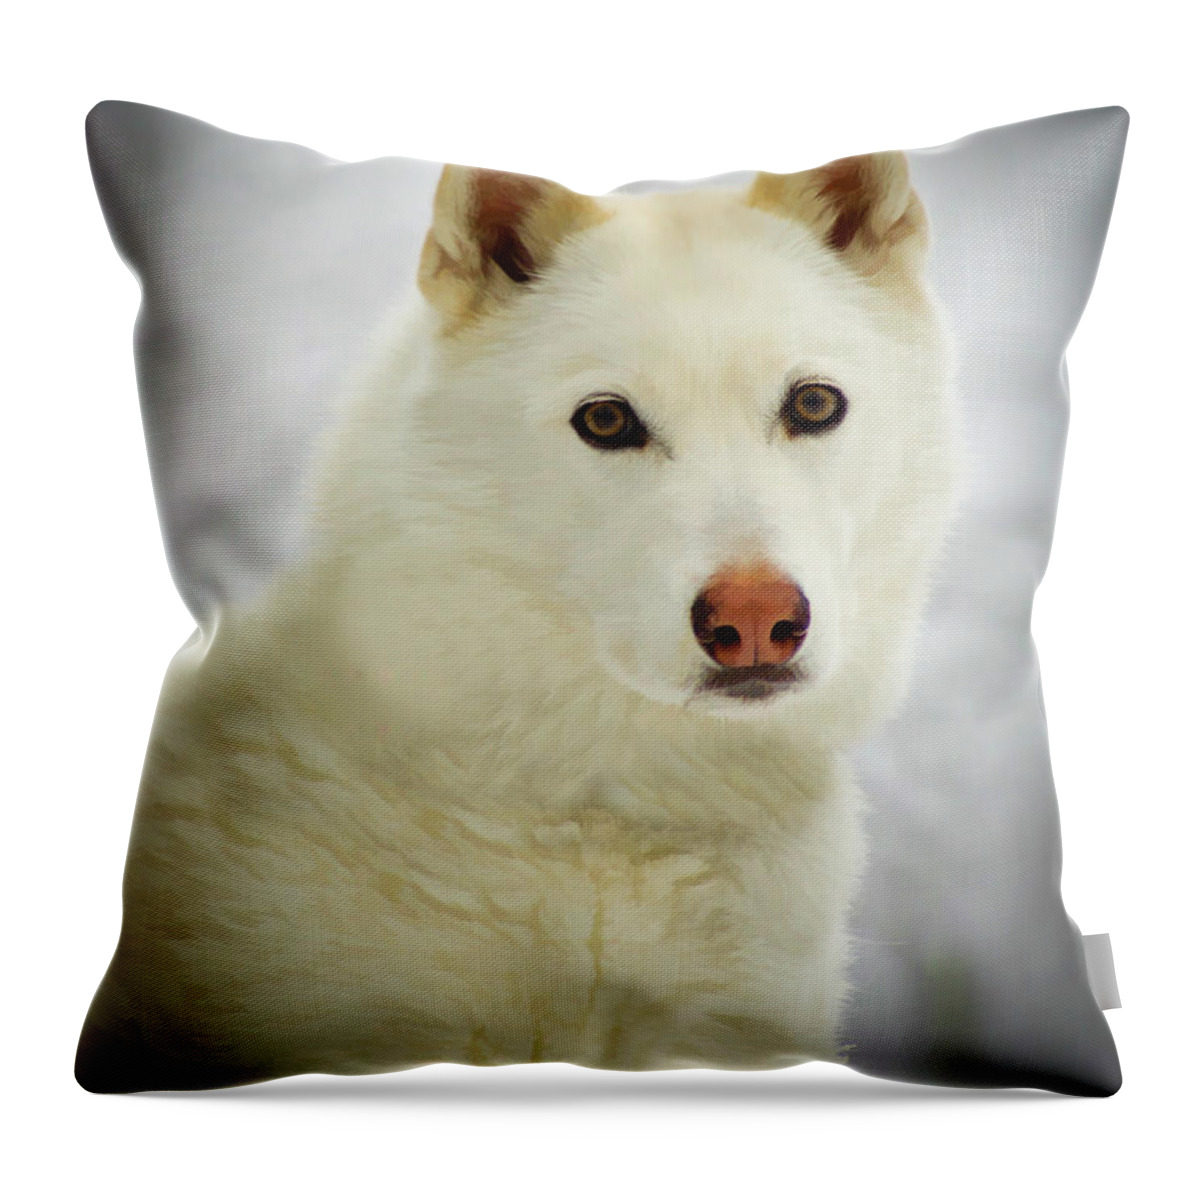 Husky Throw Pillow featuring the photograph The Stare by Joye Ardyn Durham